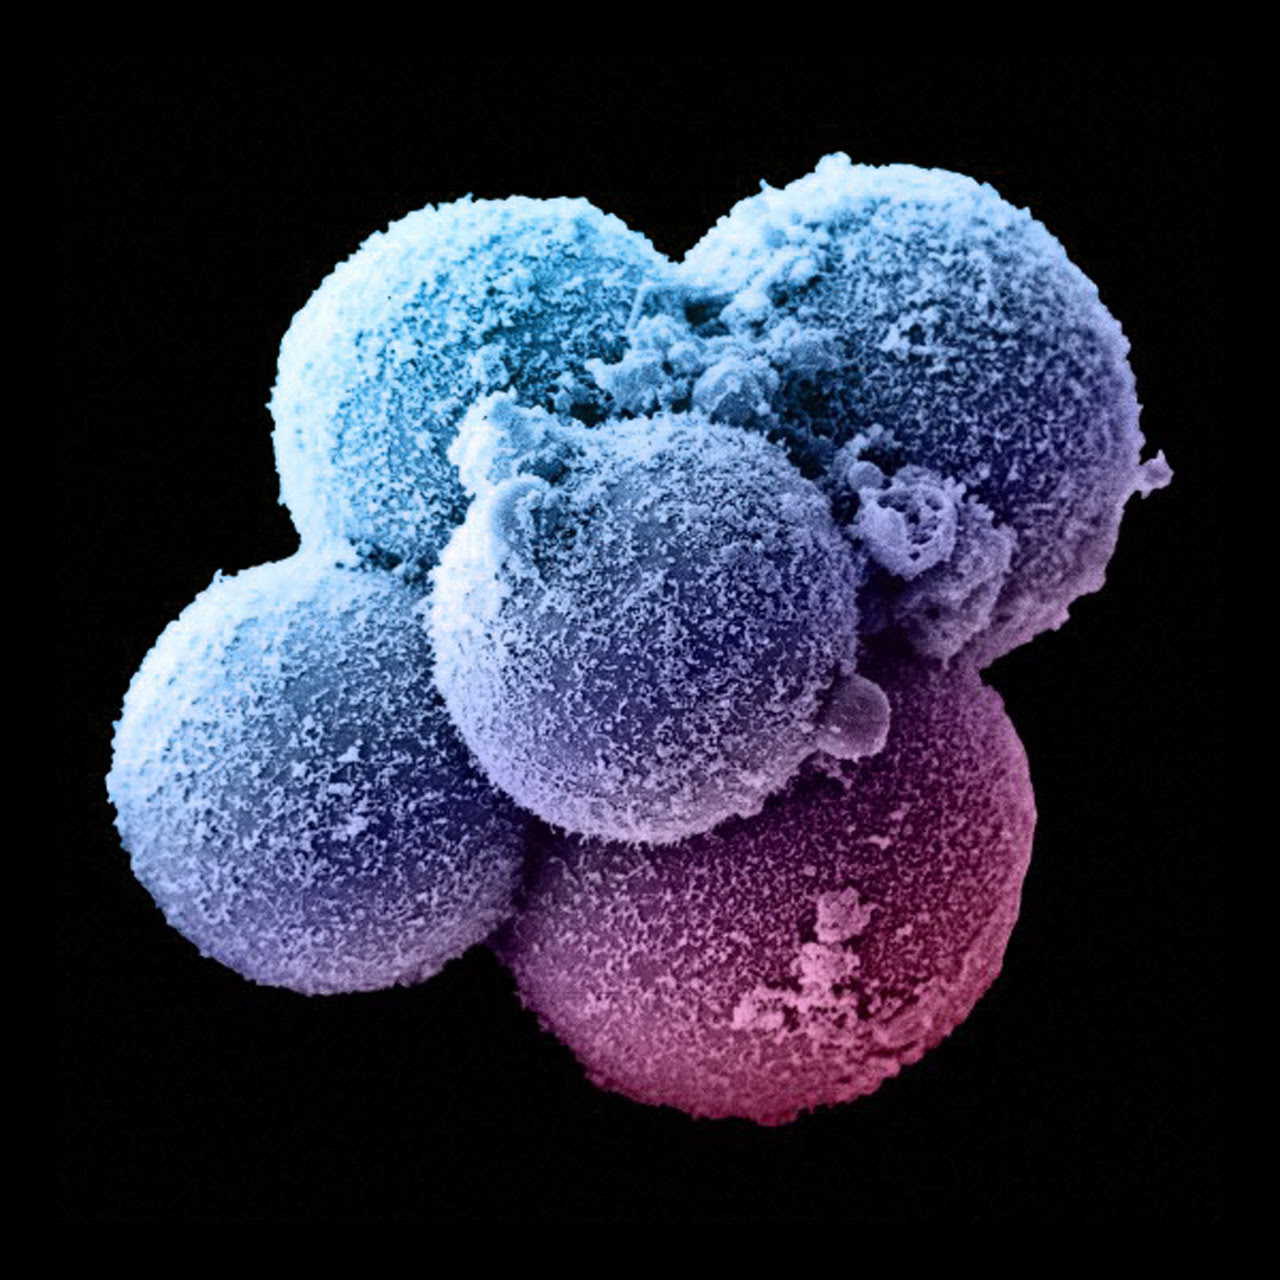 A human zygote in the 8 cell stage.